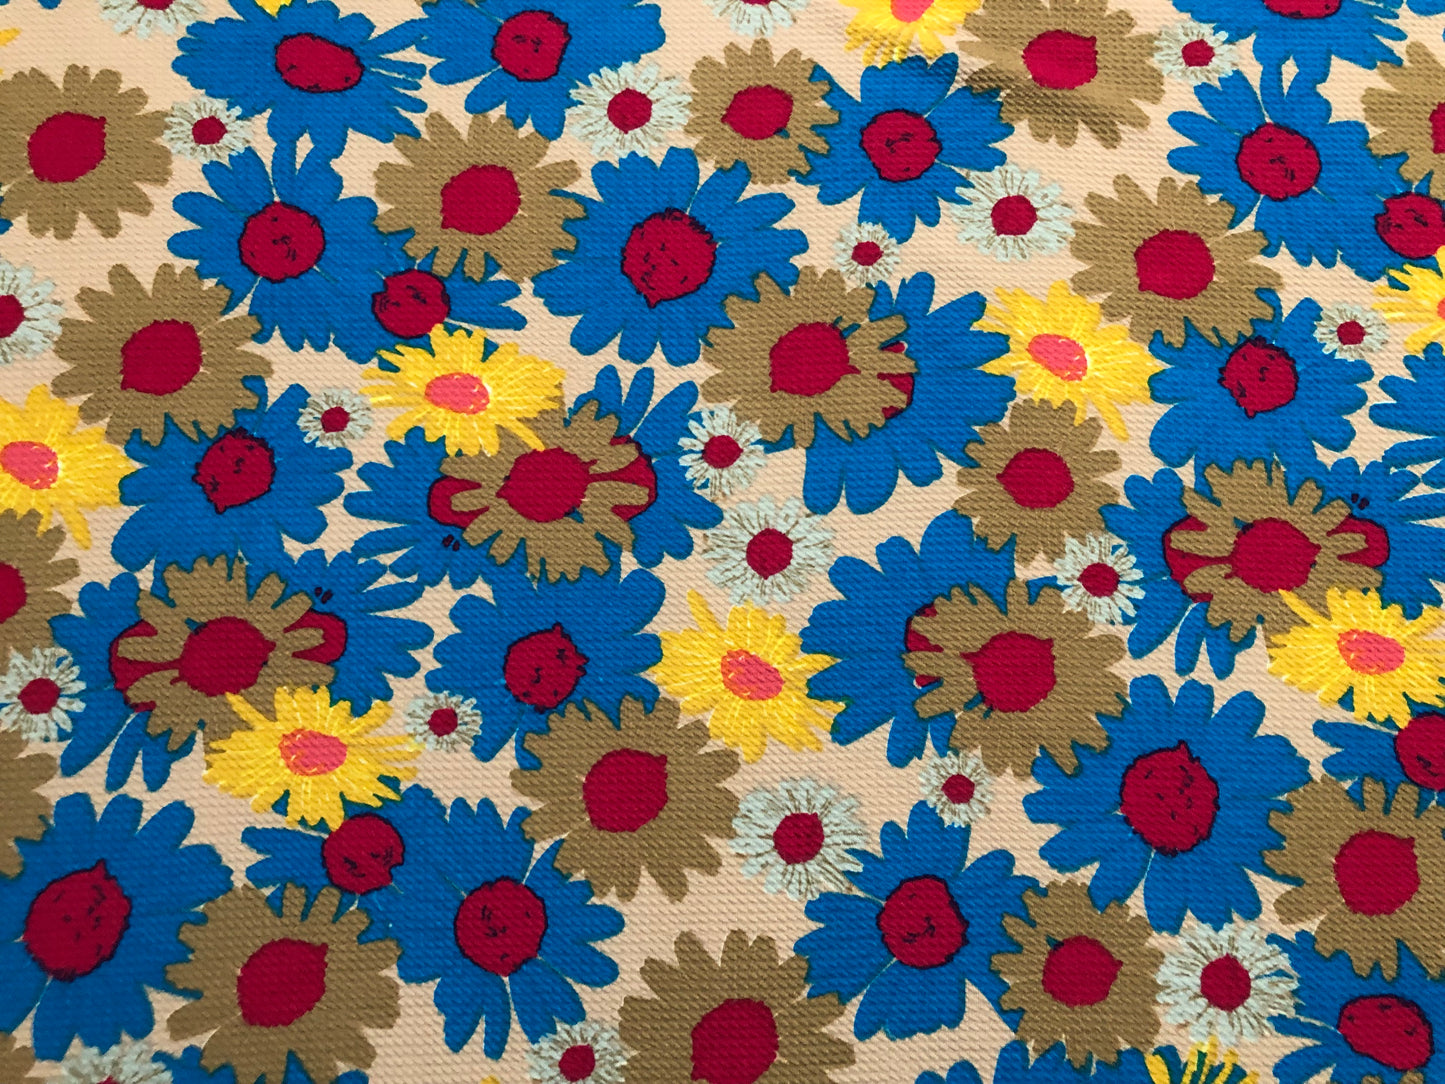 Bullet Knit Printed Fabric-Blue Brown Sunflowers-BPR243-Sold by the Yard